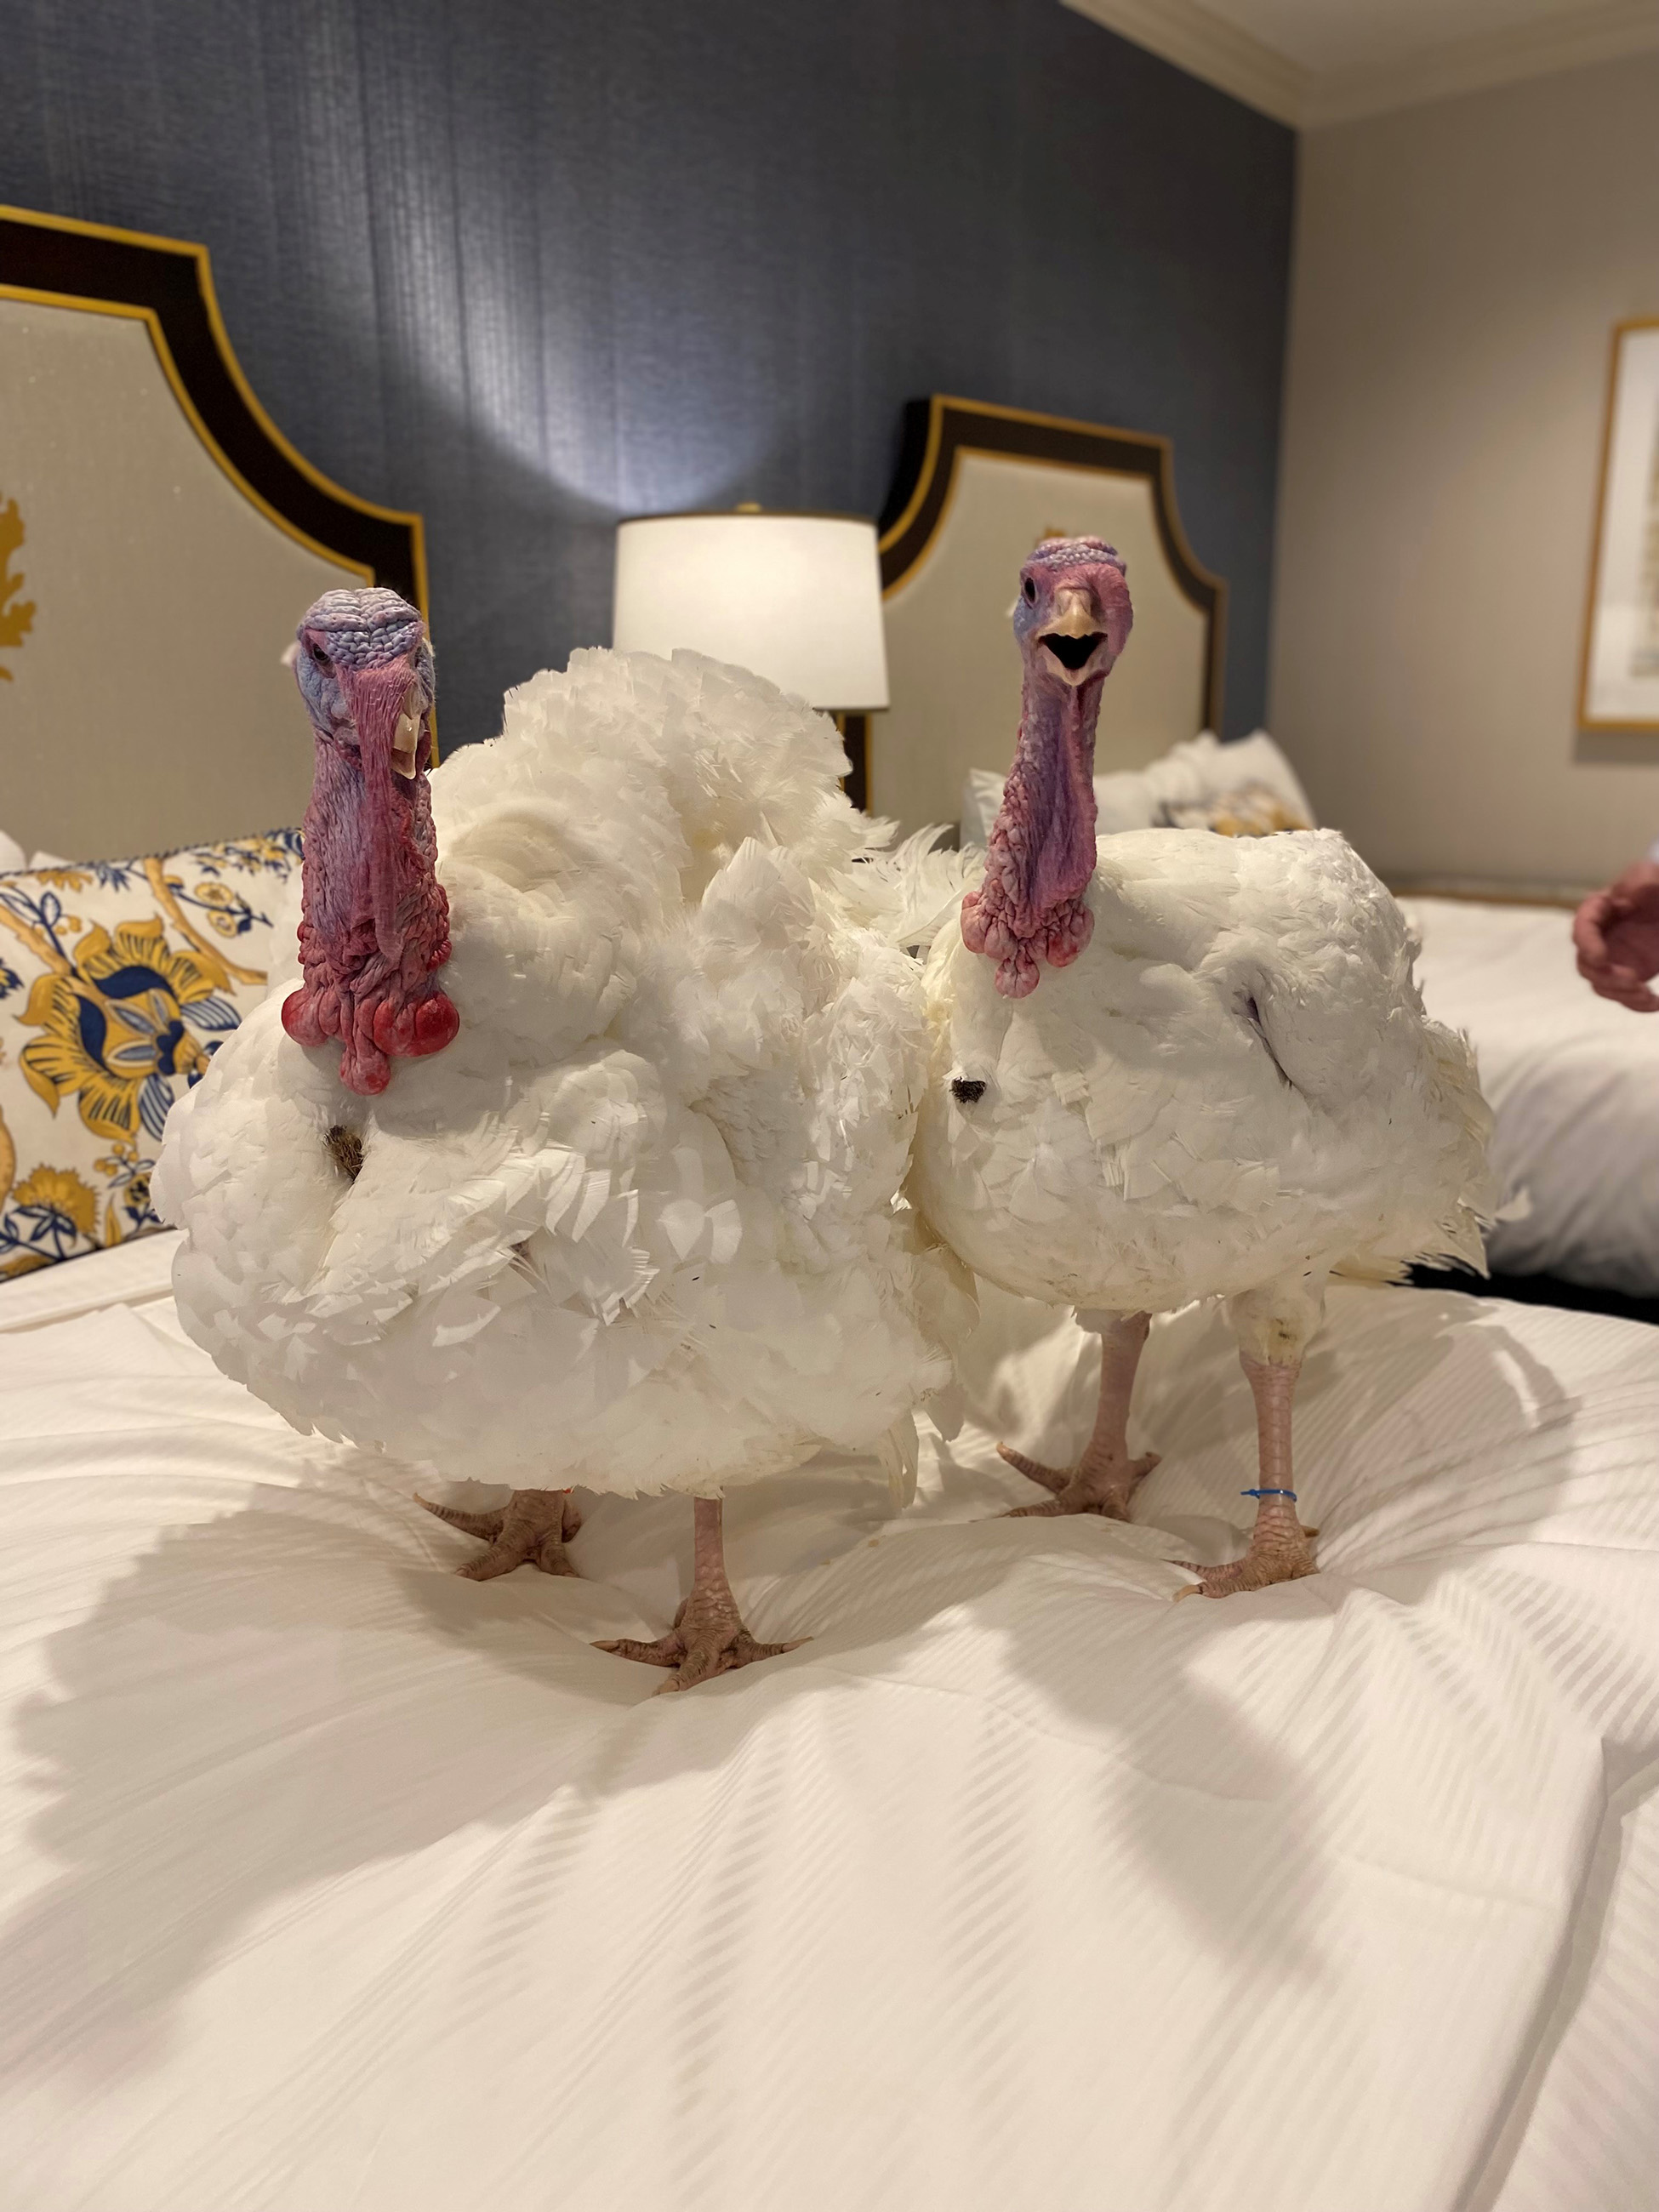 No fowl play here! Just Chocolate and Chip jumping on the bed at the Willard InterContinental.